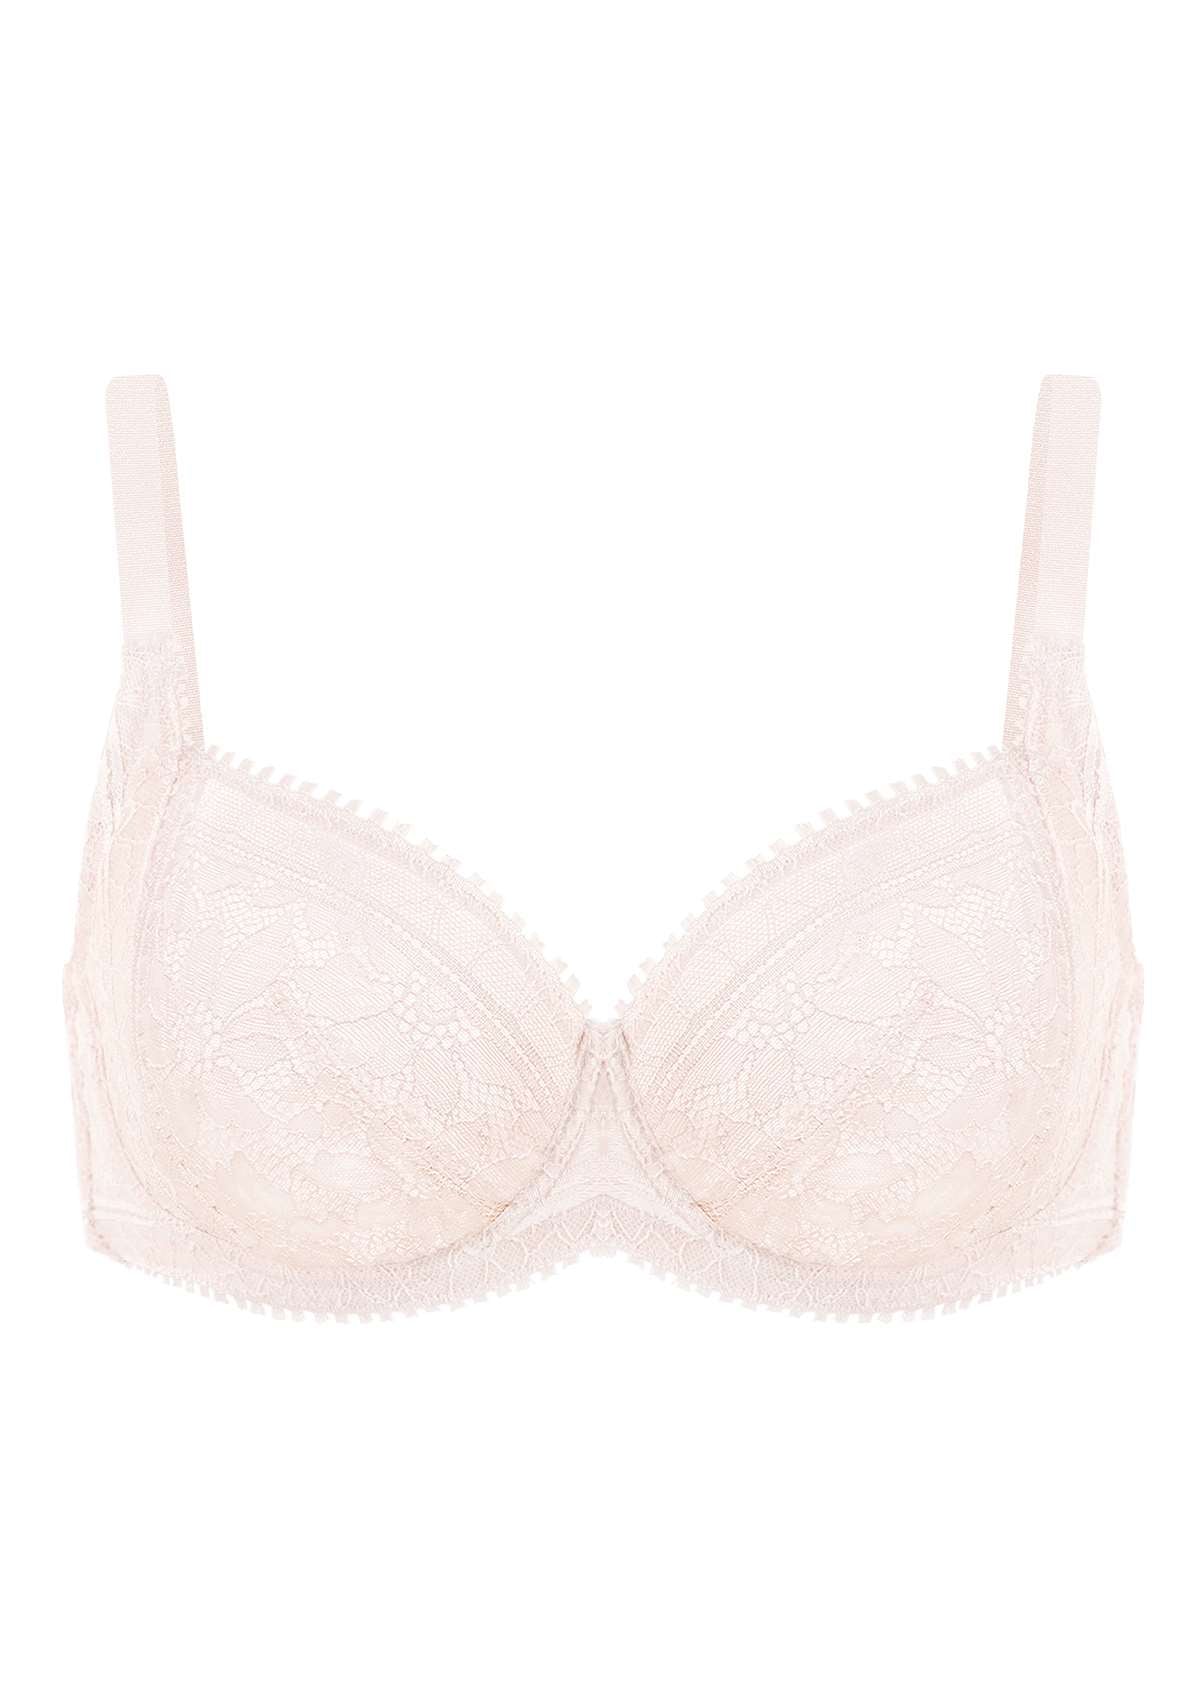 HSIA Silene Floral Delicate Unlined Lace Soft Cup Uplift Bra - Champagne / 38 / C